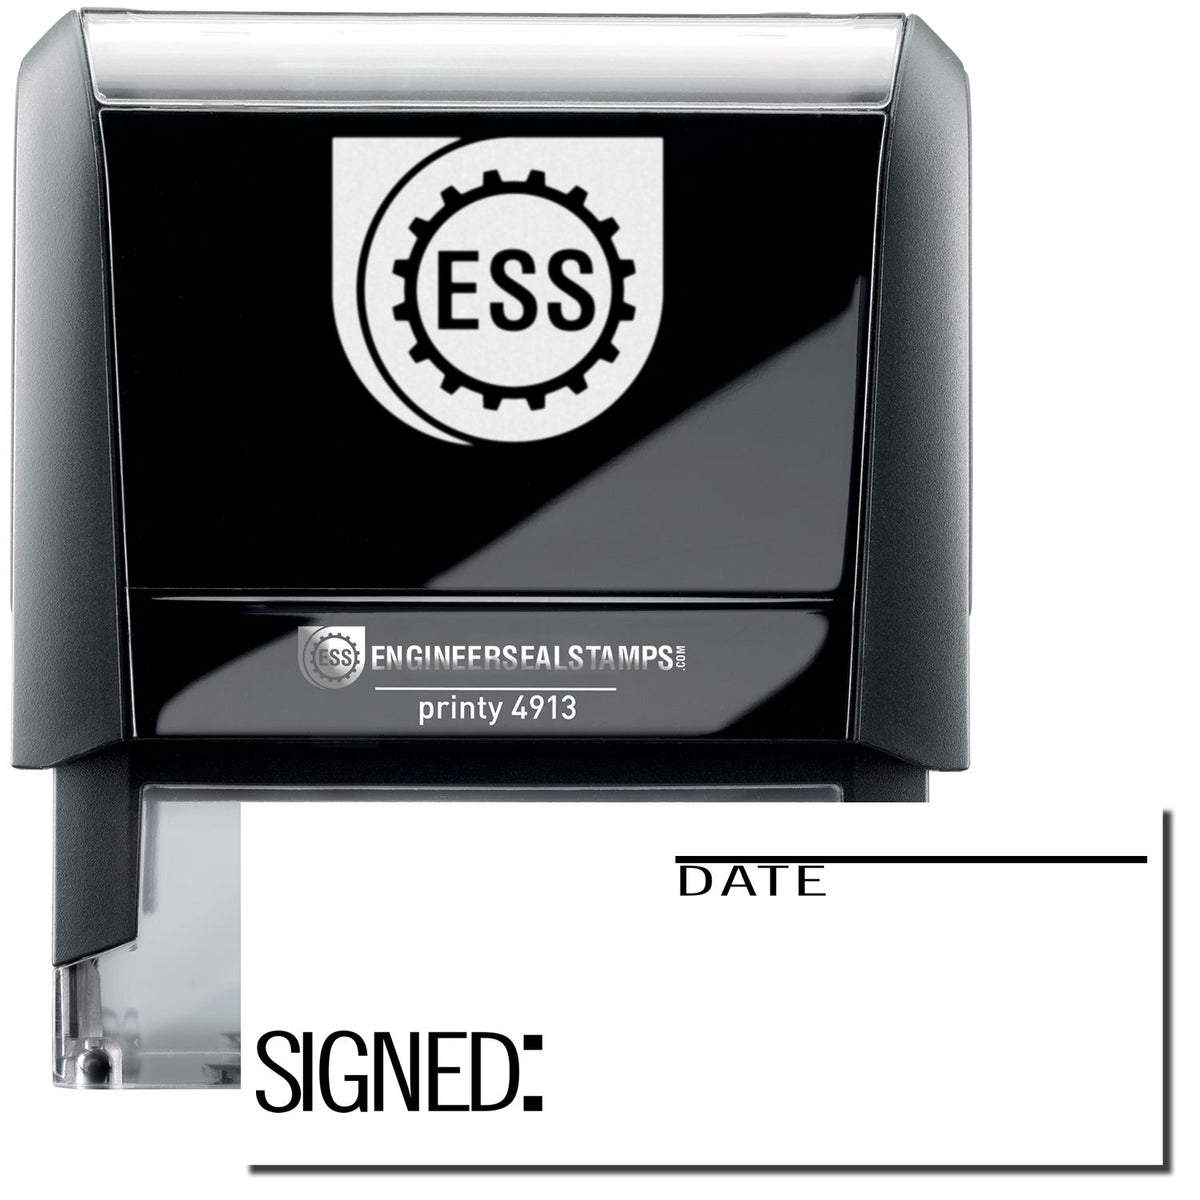 A self-inking stamp with a stamped image showing how the text &quot;SIGNED: DATE&quot; in a large font is displayed by it after stamping (where the word &quot;DATE&quot; is at the top right (with a sleeping line over it) and the word &quot;SIGNED&quot; (with a colon(:)) at the bottom left are shown).